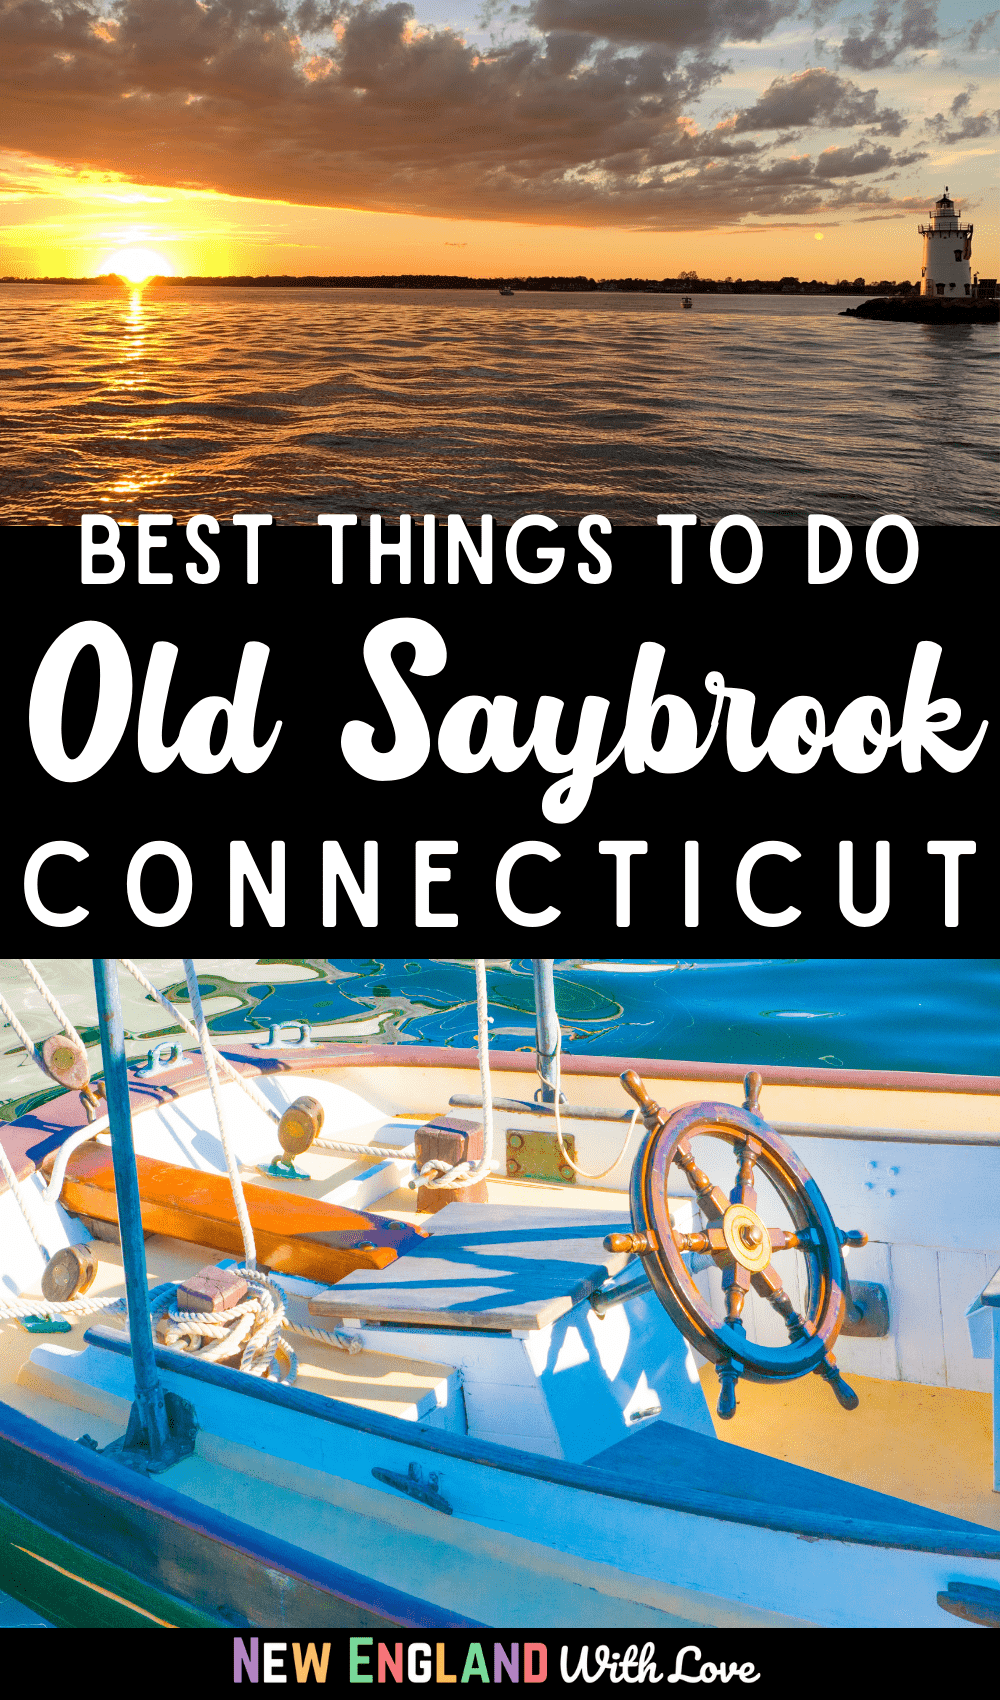 Pinterest graphic reading "Best Things To Do Old Saybrook Connecticut" with a  picture of a boat interior and water